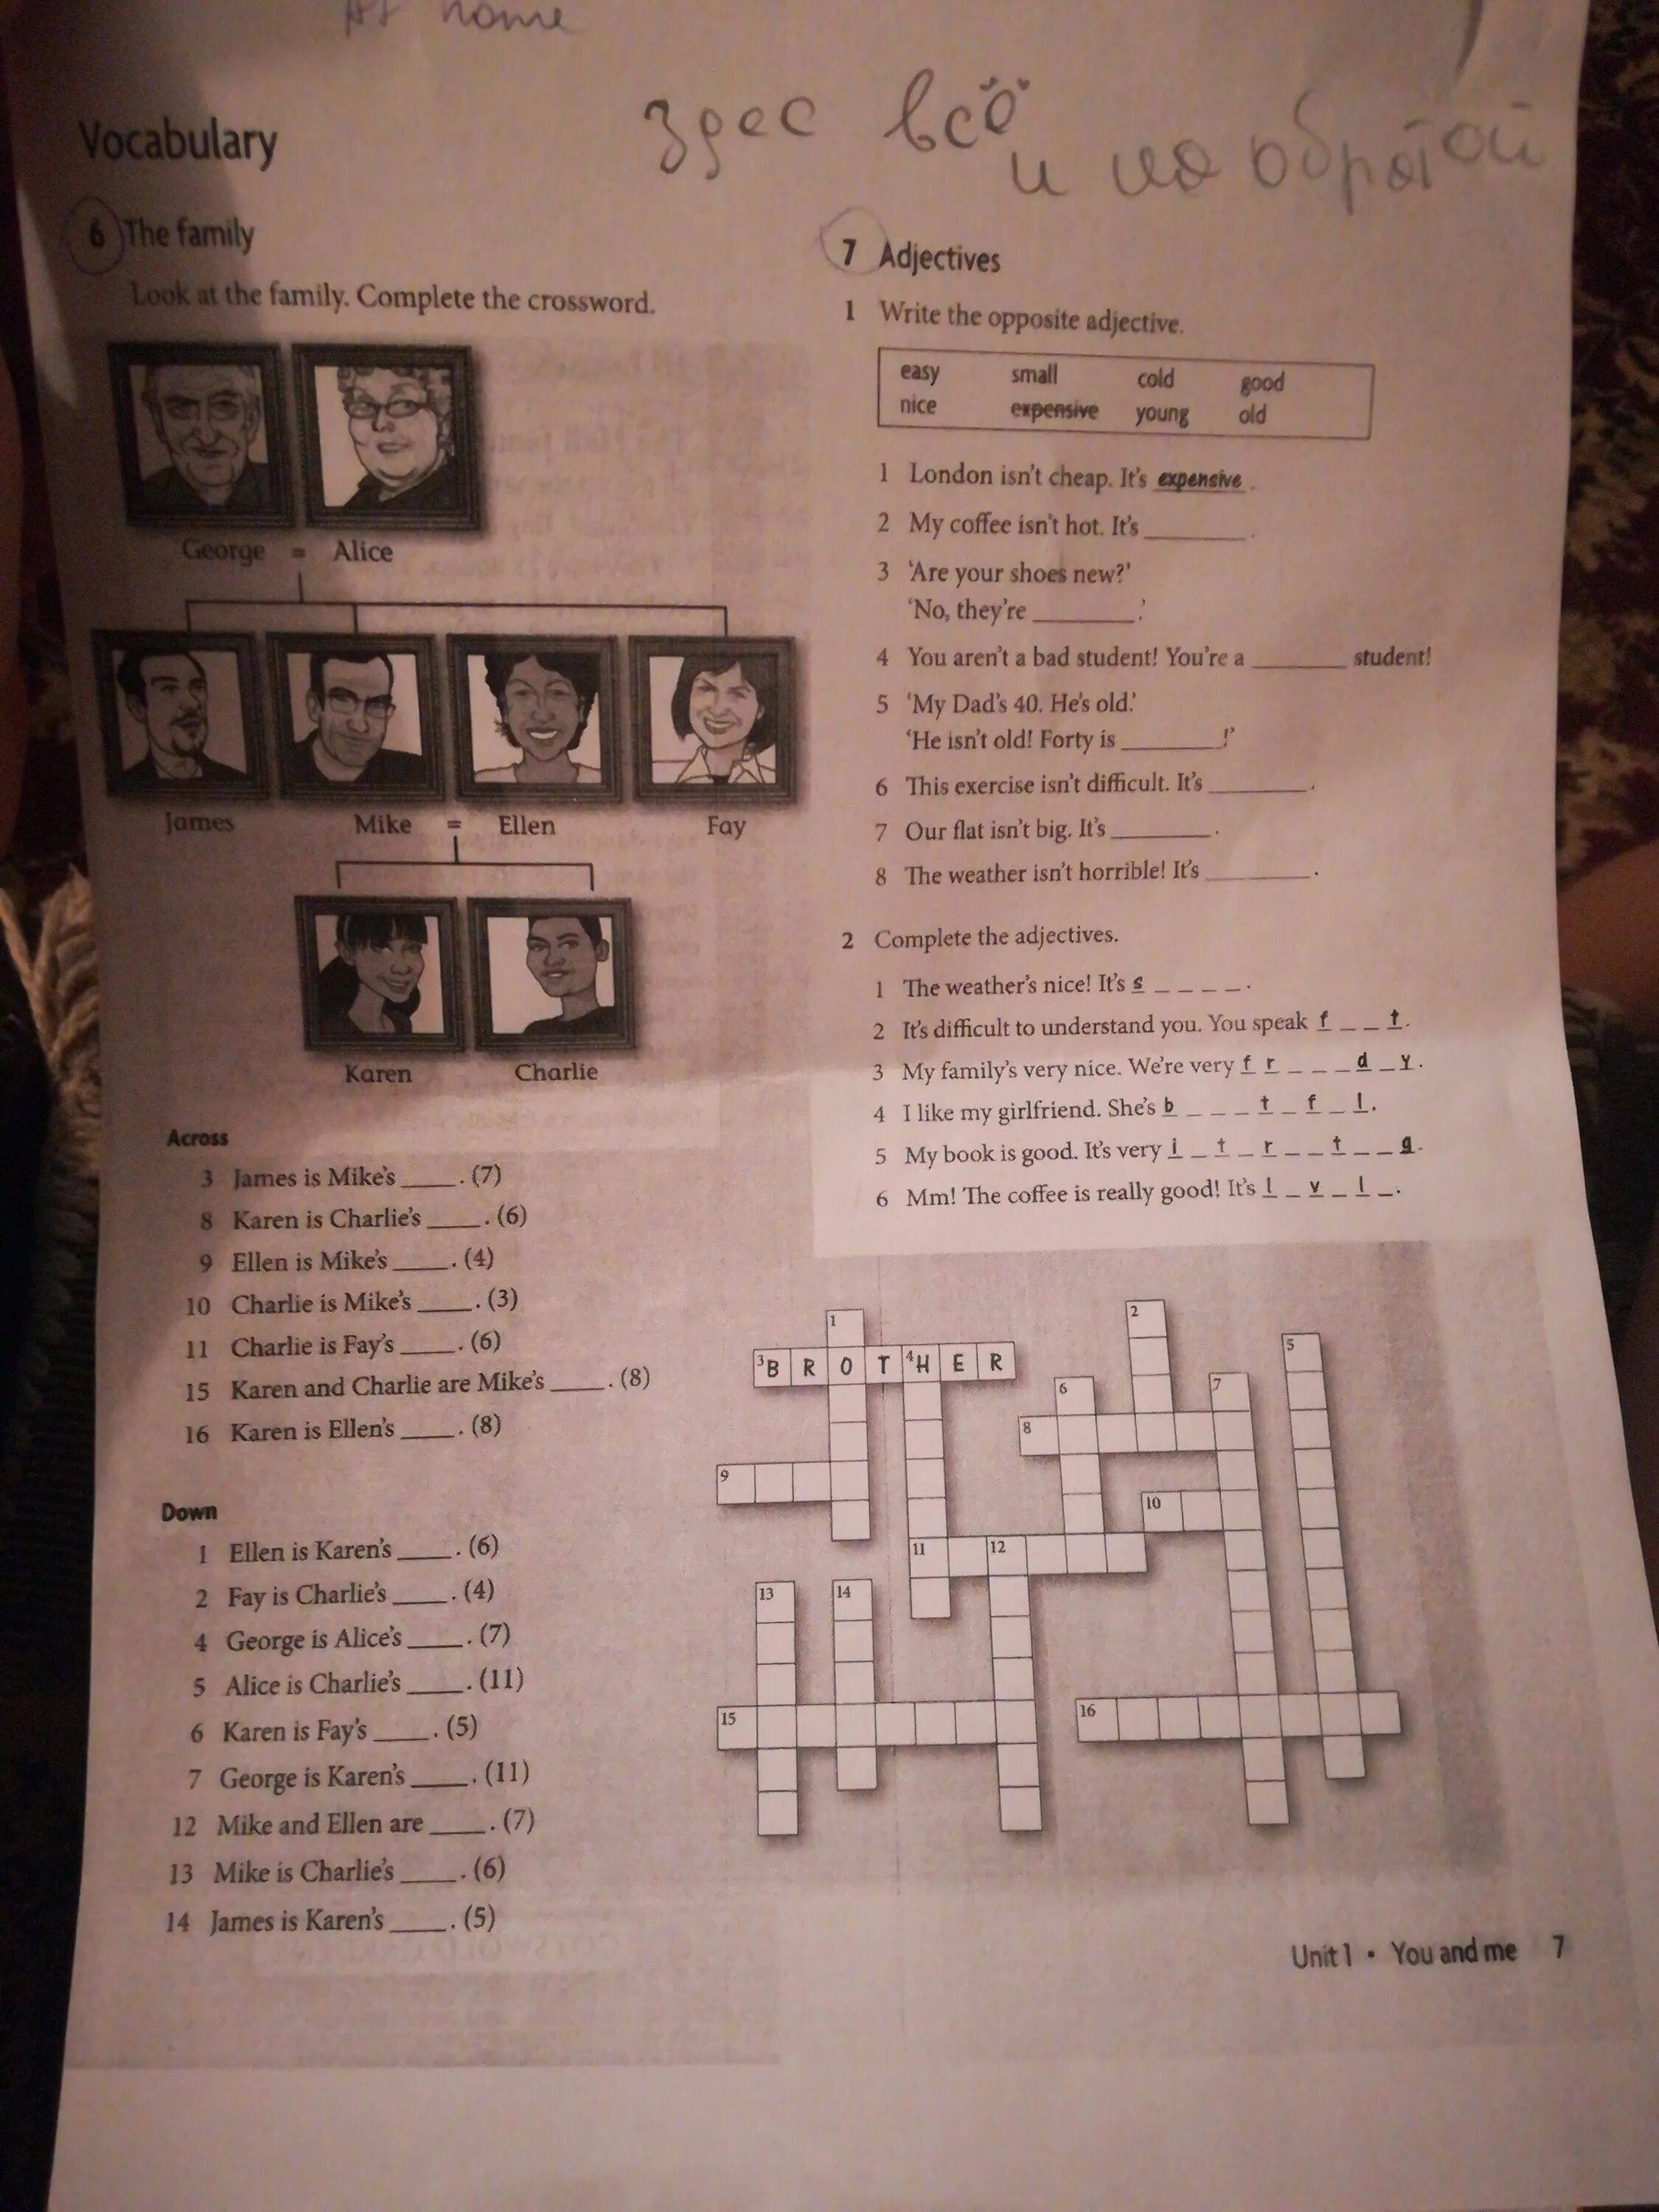 Look and complete the crossword ответы. Look at the Family complete the crossword ответы. 6. Look at the Family. Complete the crossword ответы. Look at the Family Tree complete the crossword. Vocabulary complete the crossword